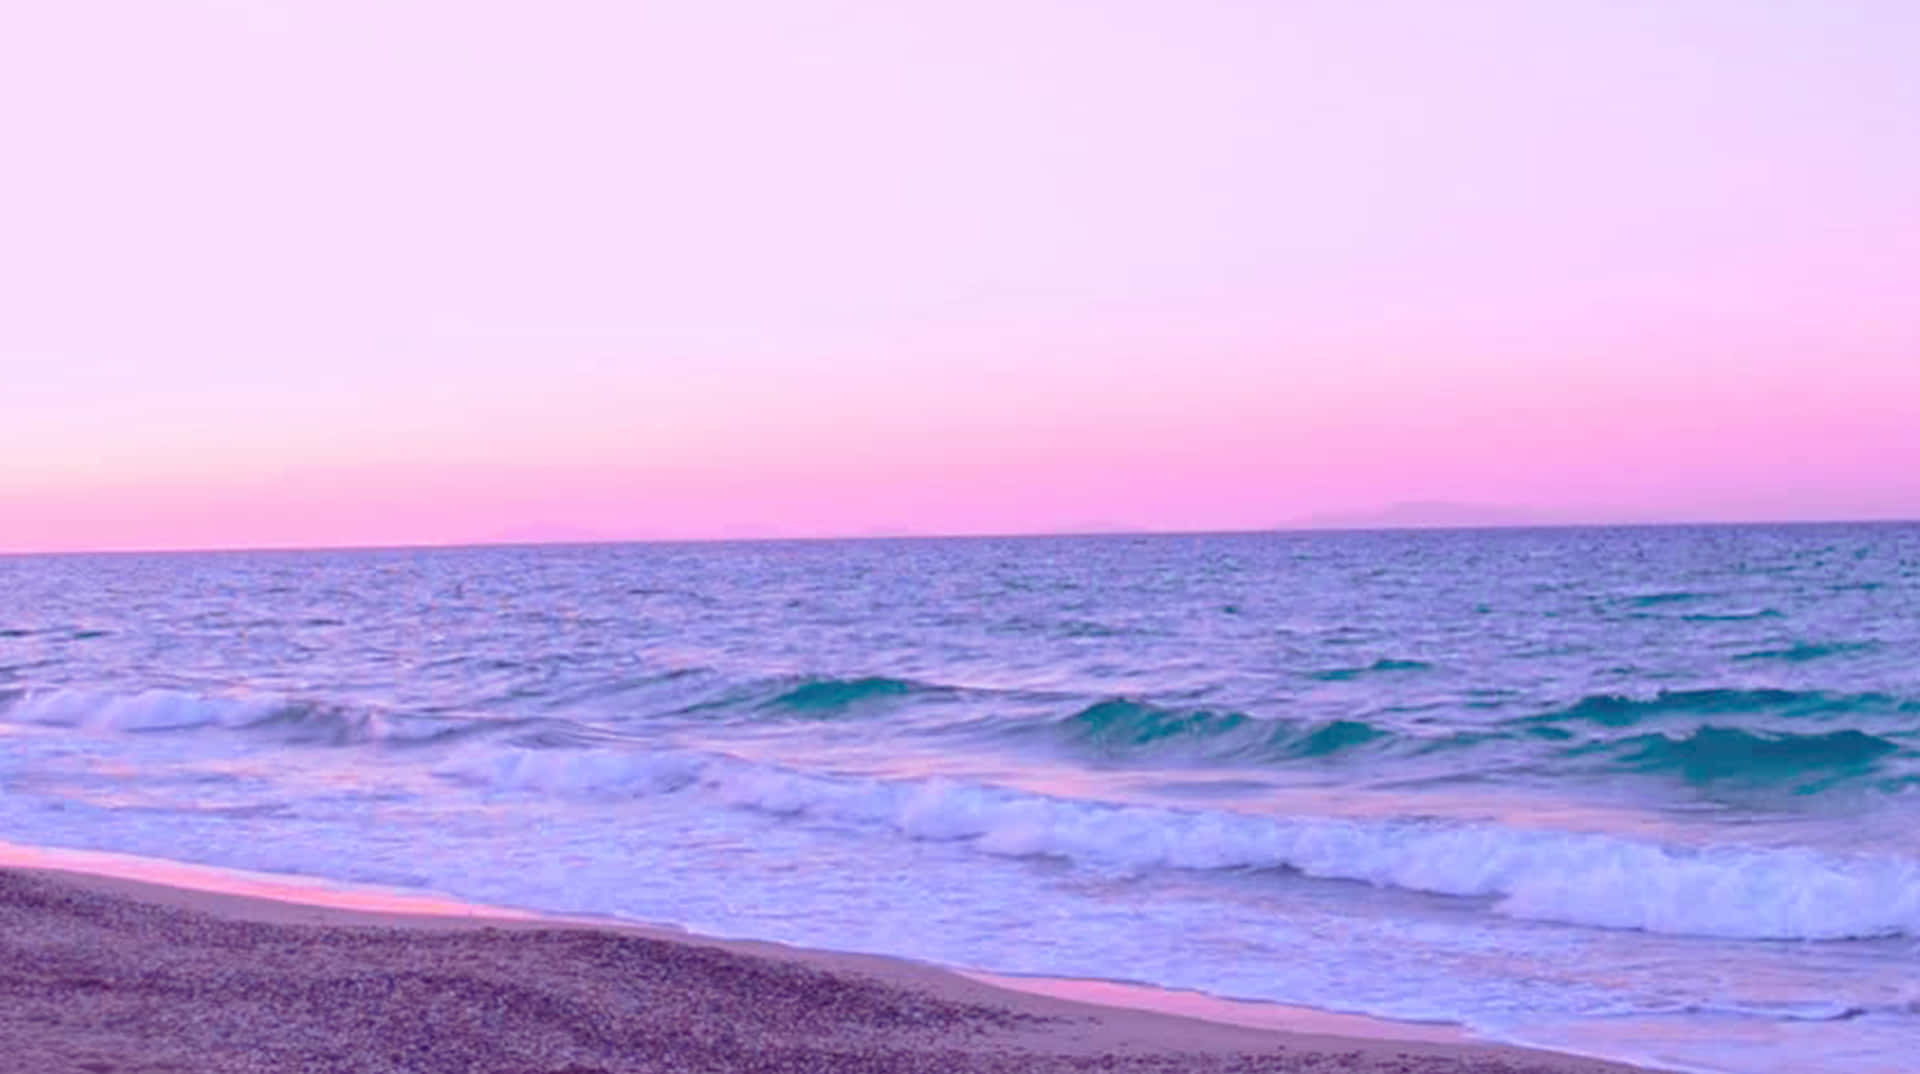 A Beach With Waves And A Pink Sunset Wallpaper